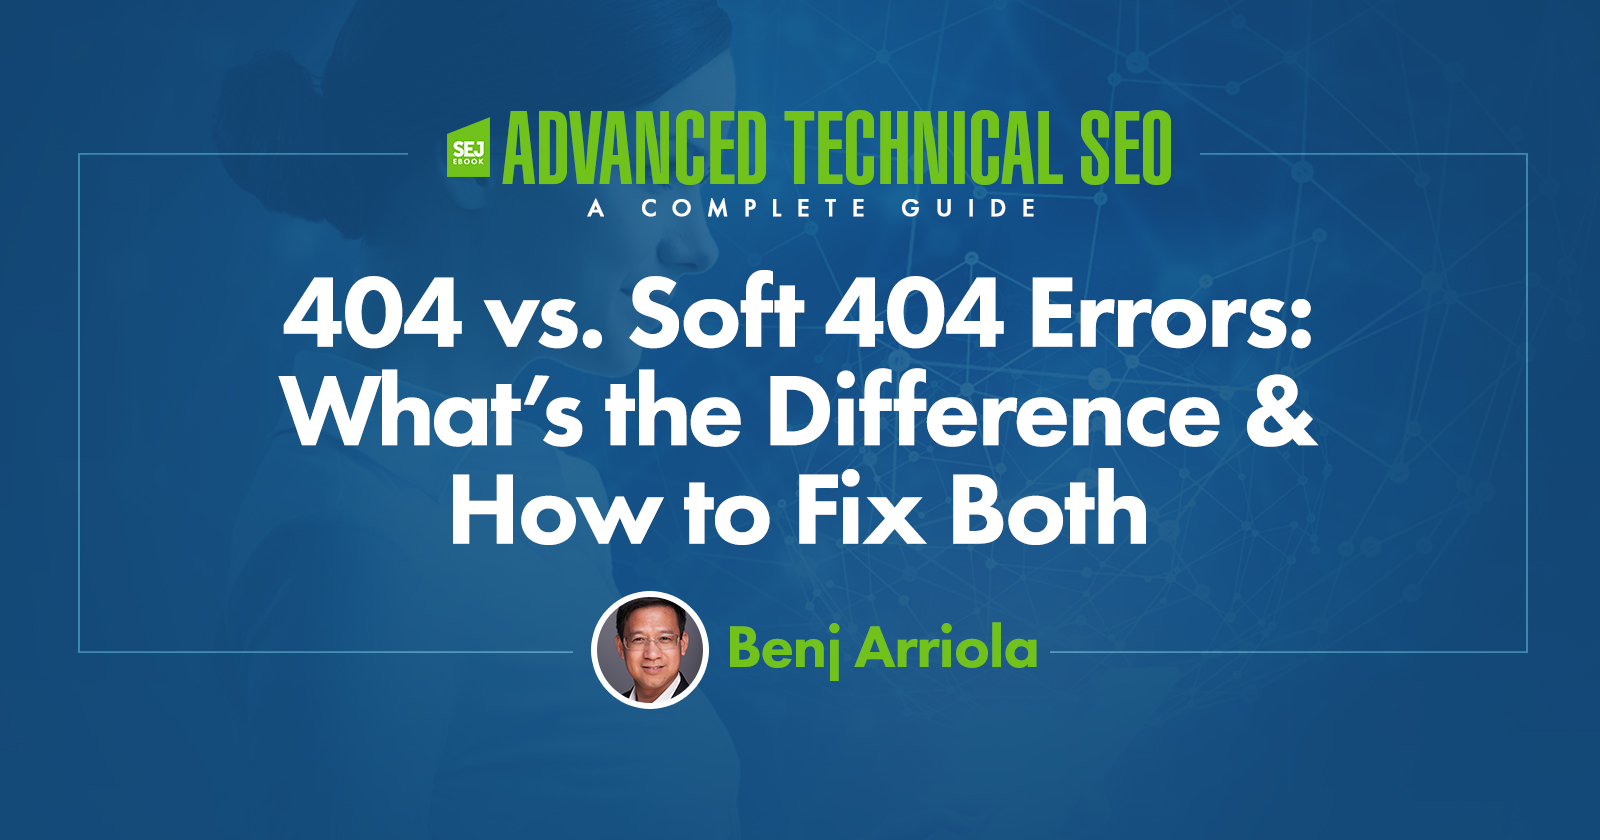 404 vs. Soft 404 Errors - What’s the Difference & How to Fix Both